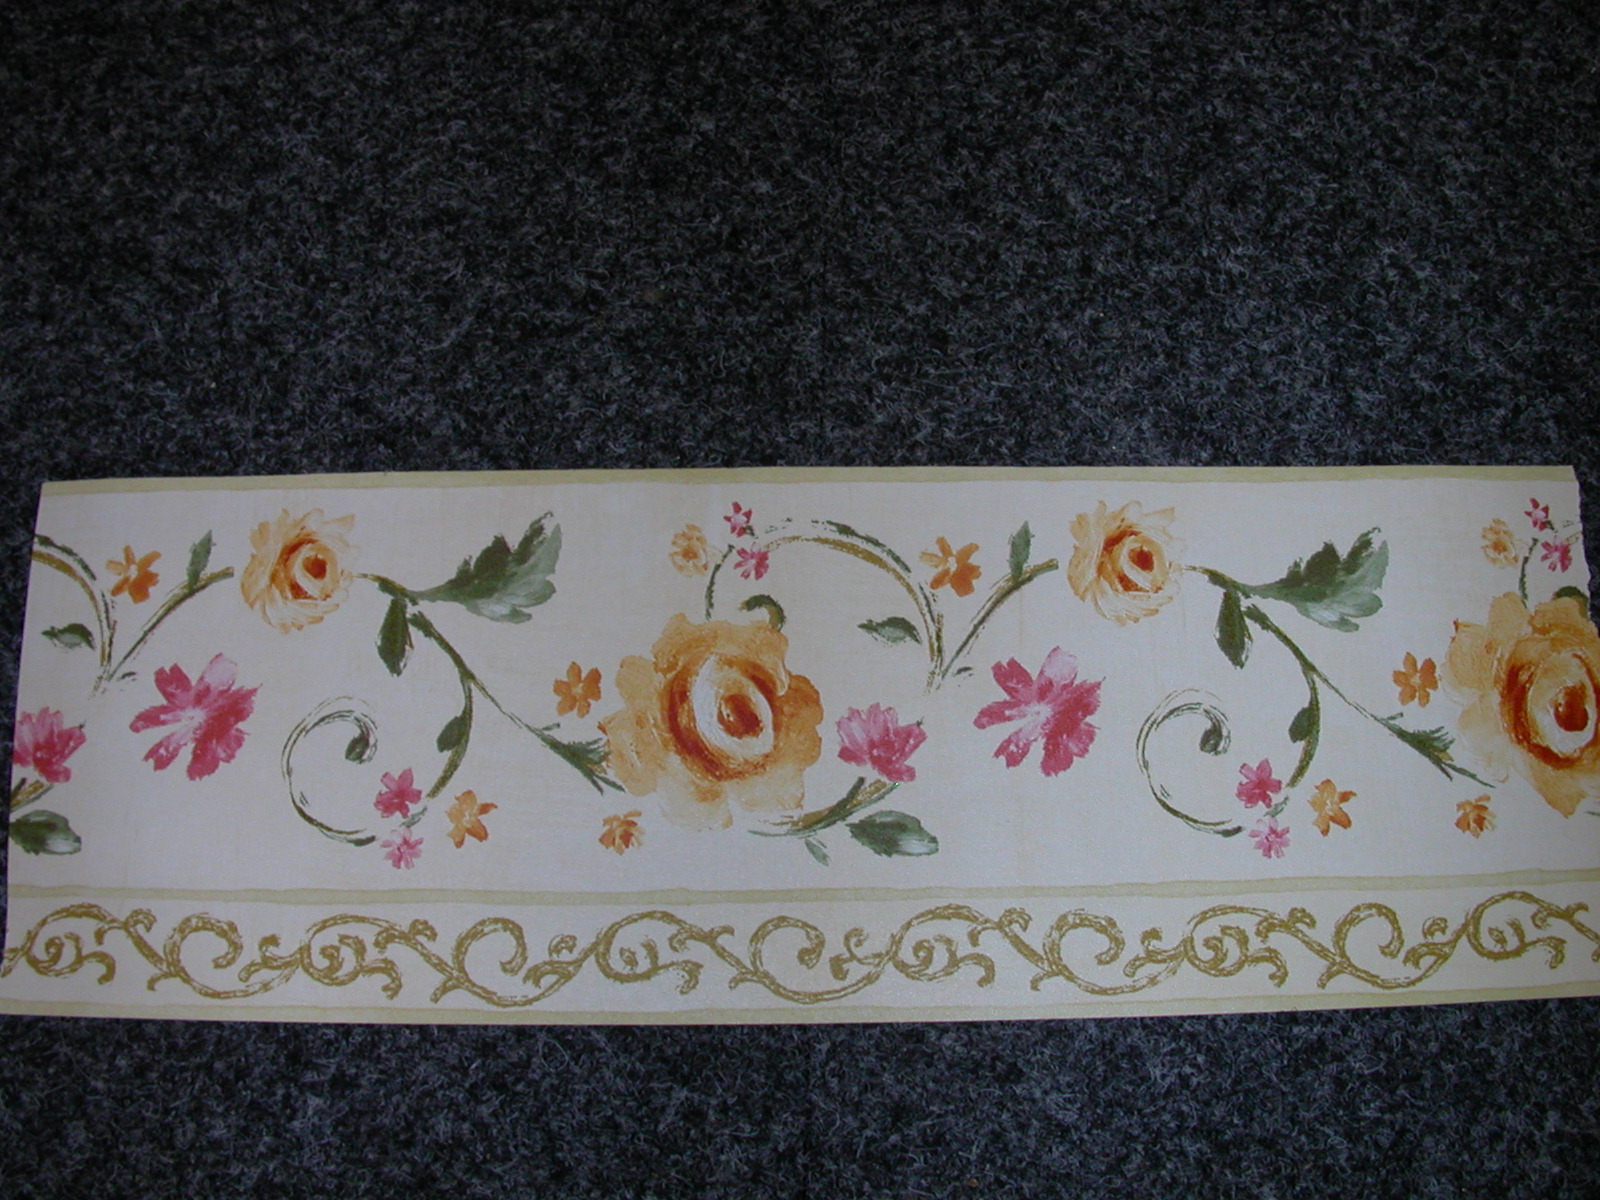 prepasted vinyl wall border Border is dry strippable and washable